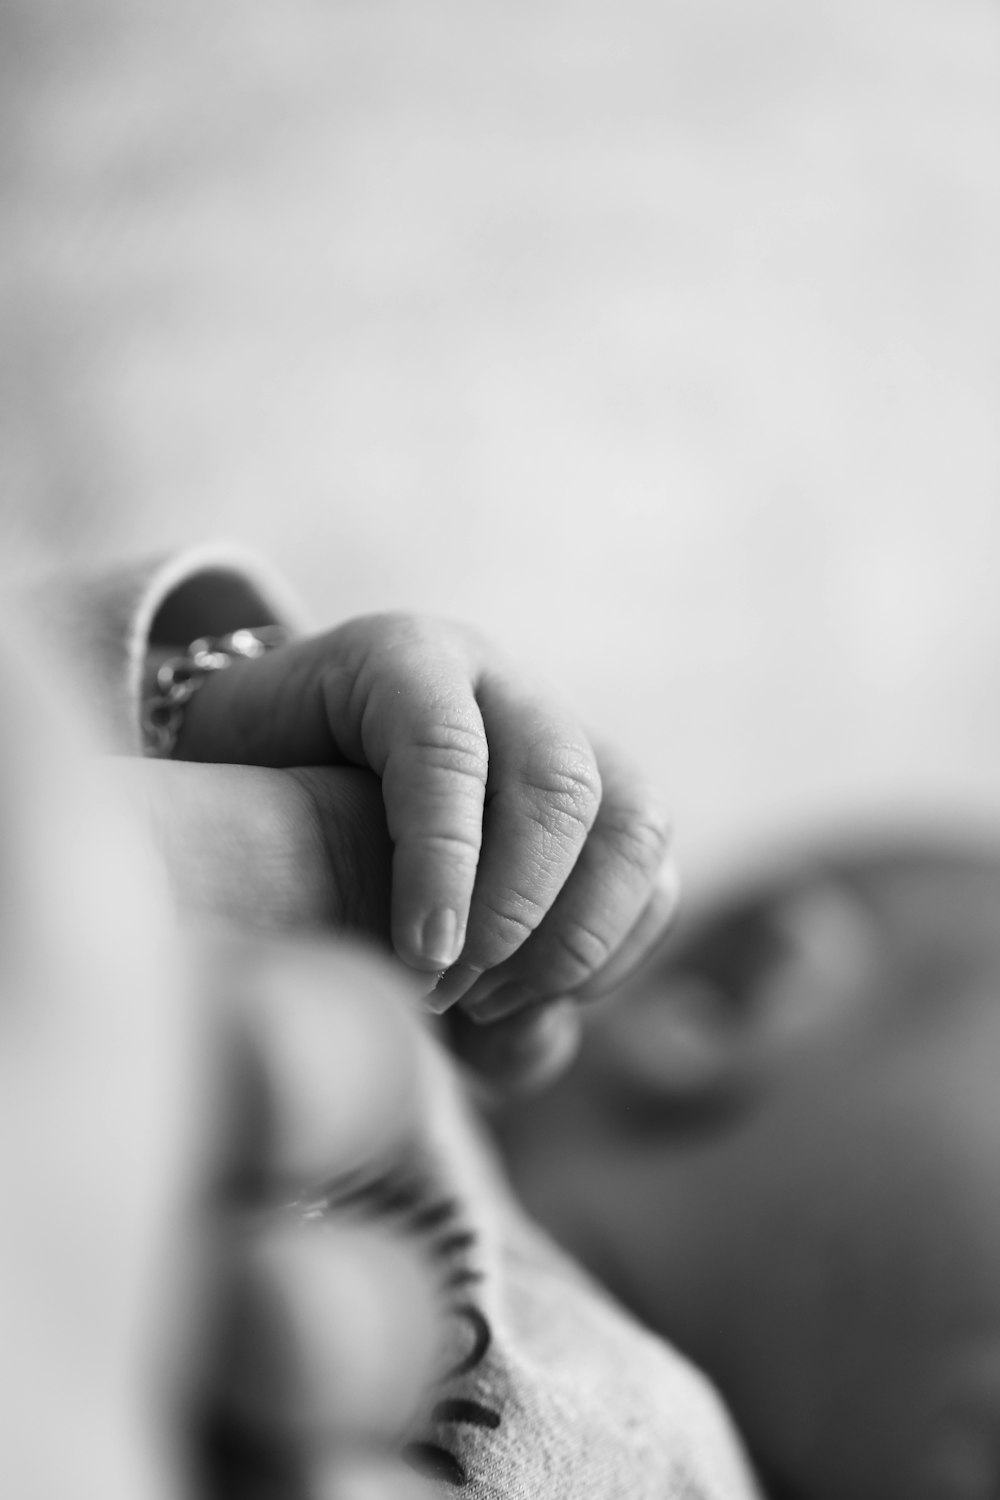 a black and white photo of a baby's hand